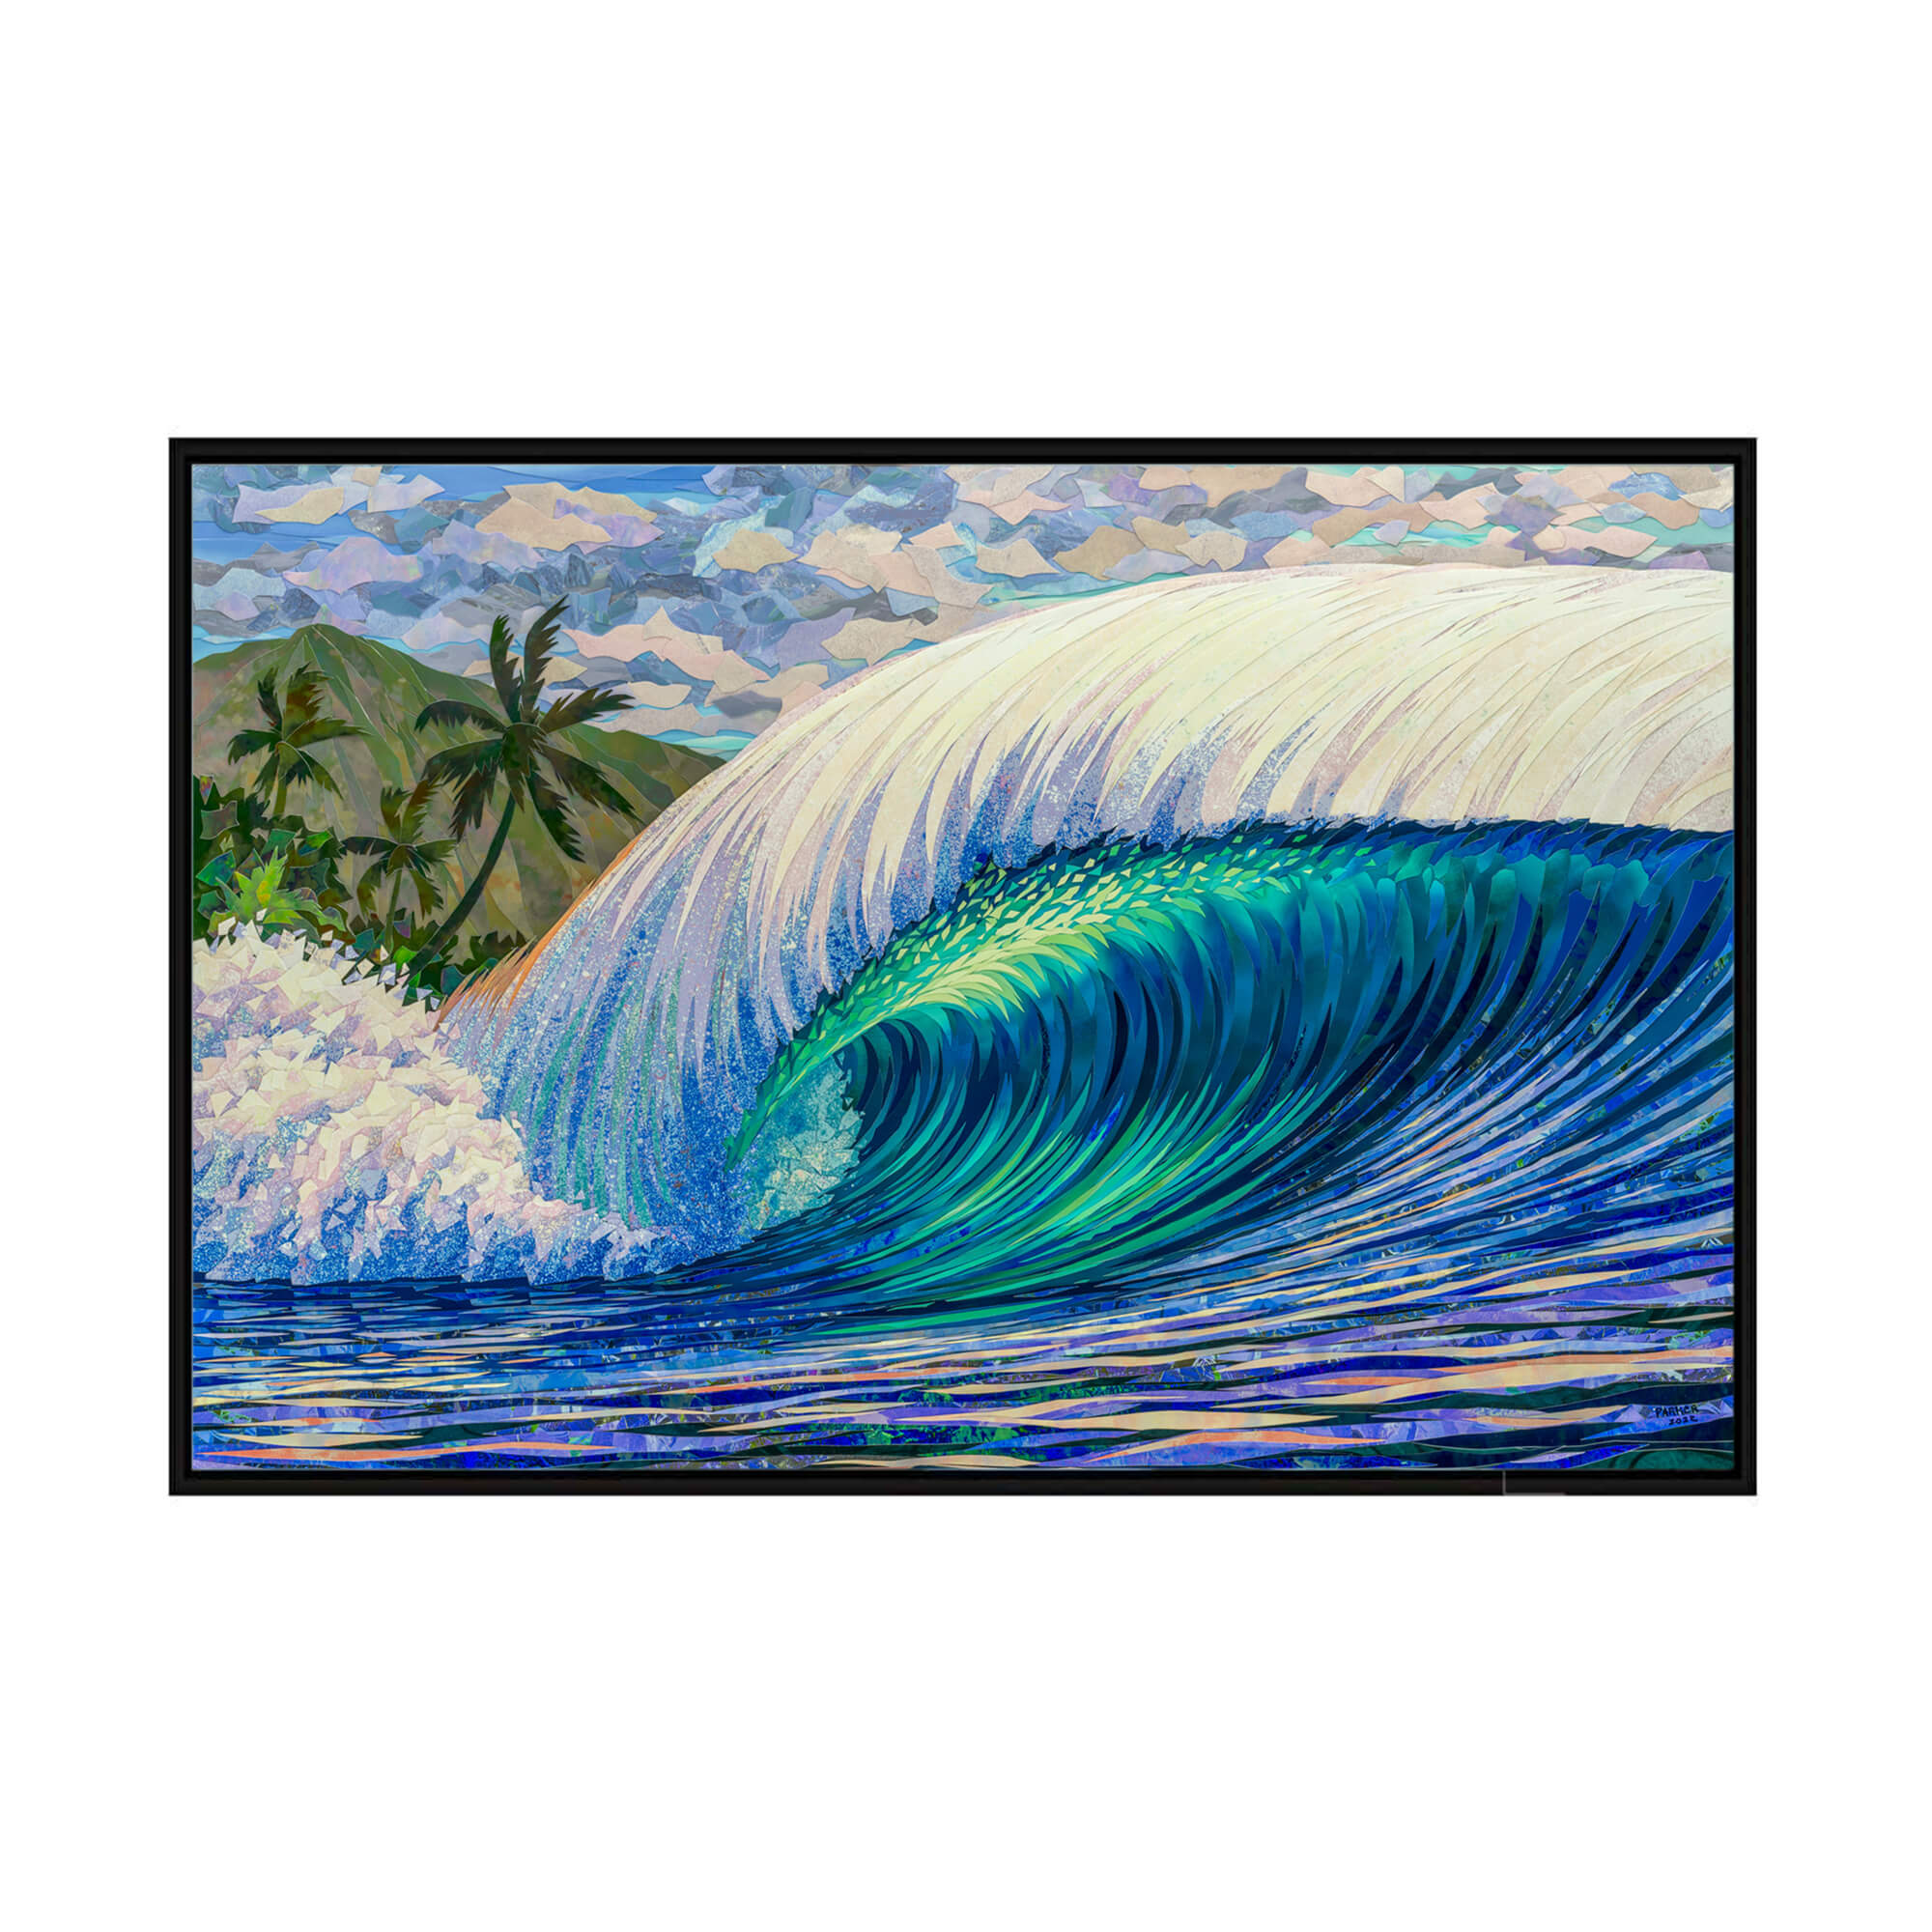 A framed canvas giclée art print featuring a collage of a large colorful rolling wave and a beautiful mountain background by Hawaii artist Patrick Parker